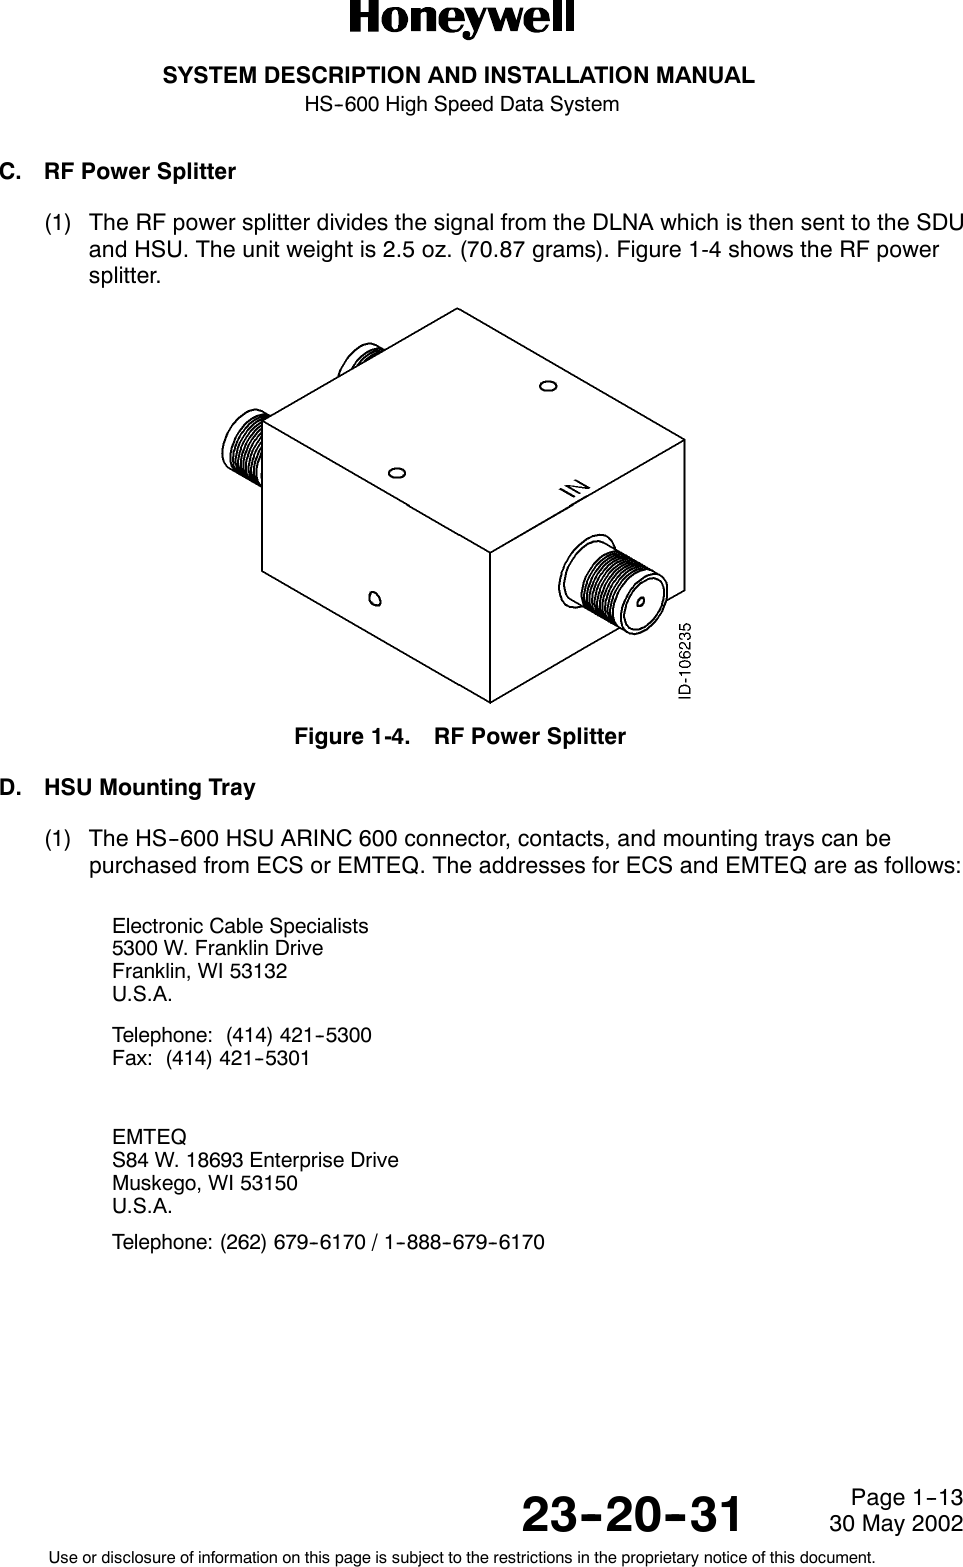 SYSTEM DESCRIPTION AND INSTALLATION MANUALHS--600 High Speed Data System23--20--3130 May 2002Use or disclosure of information on this page is subject to the restrictions in the proprietary notice of this document.Page 1--13C. RF Power Splitter(1) The RF power splitter divides the signal from the DLNA which is then sent to the SDUand HSU. The unit weight is 2.5 oz. (70.87 grams). Figure 1-4 shows the RF powersplitter.Figure 1-4. RF Power SplitterD. HSU Mounting Tray(1) The HS--600 HSU ARINC 600 connector, contacts, and mounting trays can bepurchased from ECS or EMTEQ. The addresses for ECS and EMTEQ are as follows:Electronic Cable Specialists5300 W. Franklin DriveFranklin, WI 53132U.S.A.Telephone: (414) 421--5300Fax: (414) 421--5301EMTEQS84 W. 18693 Enterprise DriveMuskego, WI 53150U.S.A.Telephone: (262) 679--6170 / 1--888--679--6170